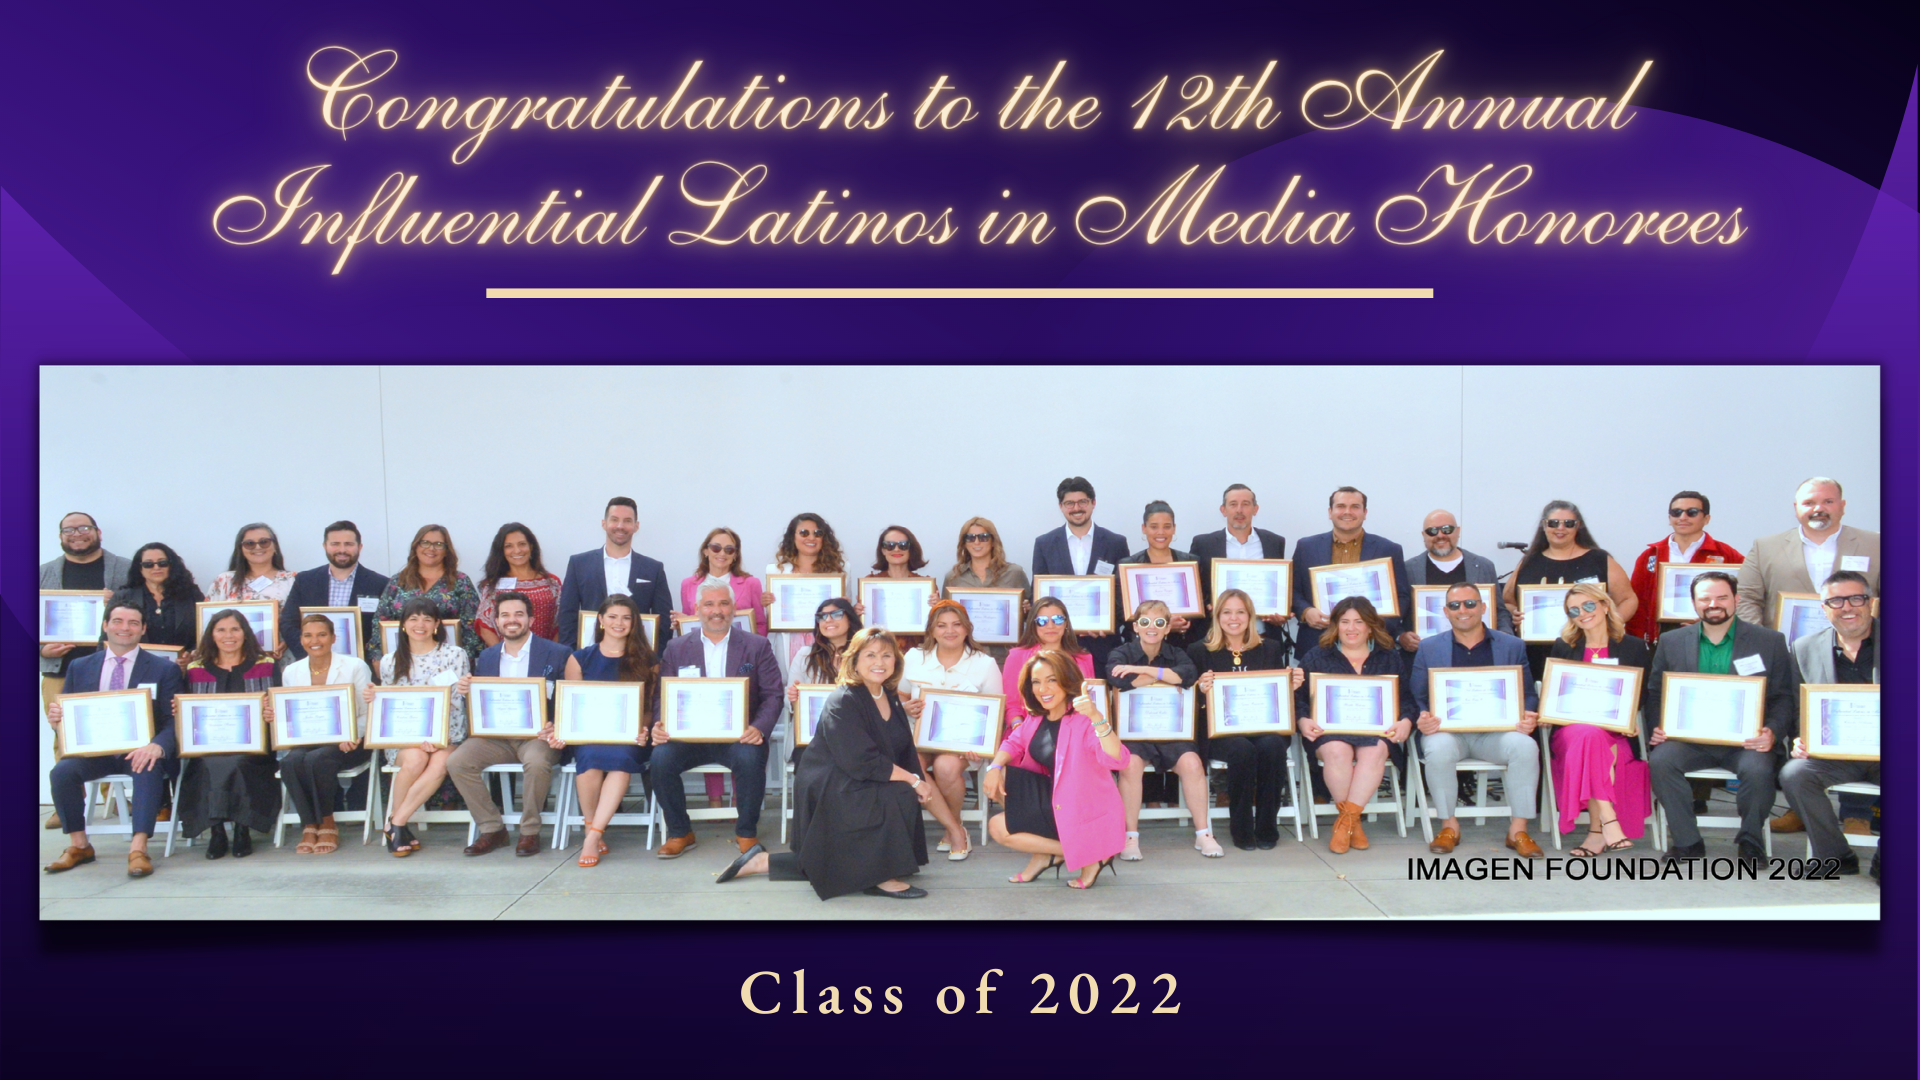 Influential Latinos in Media Honorees, Class of 2022